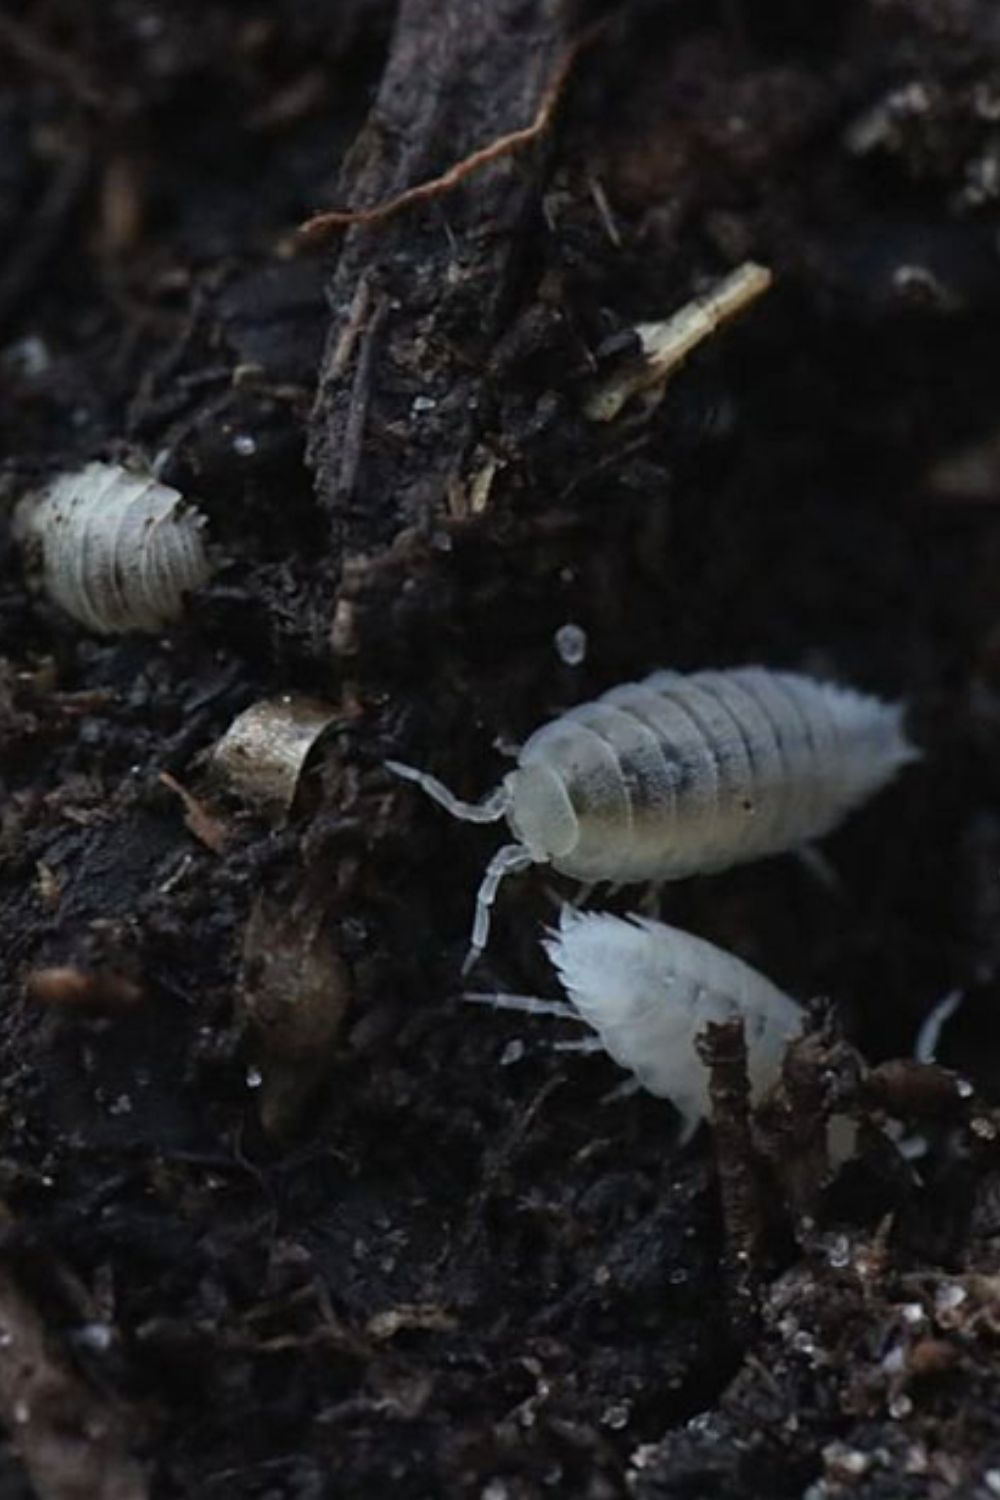 Dwarf White Isopods, due to their small size, prefer to scurry in their ecosystem and stay hidden